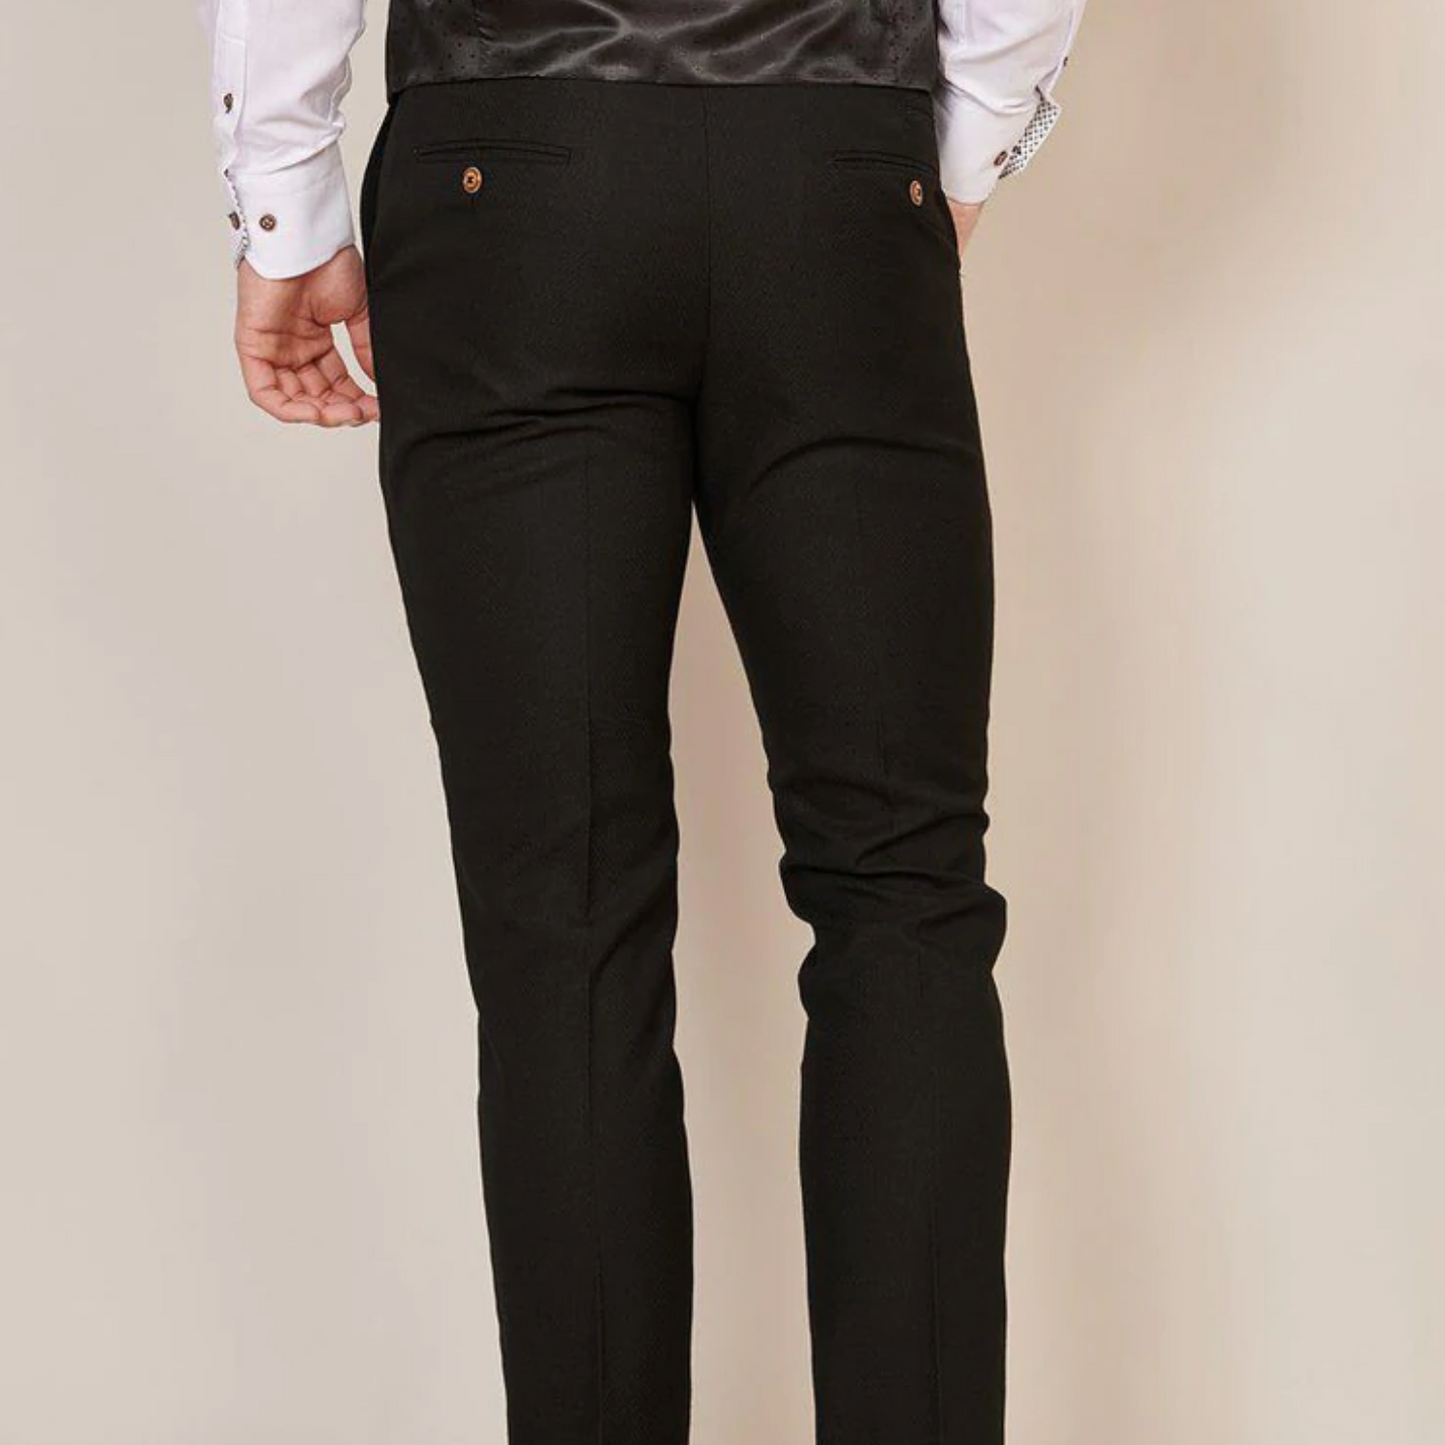 Max Black Trousers by Marc Darcy